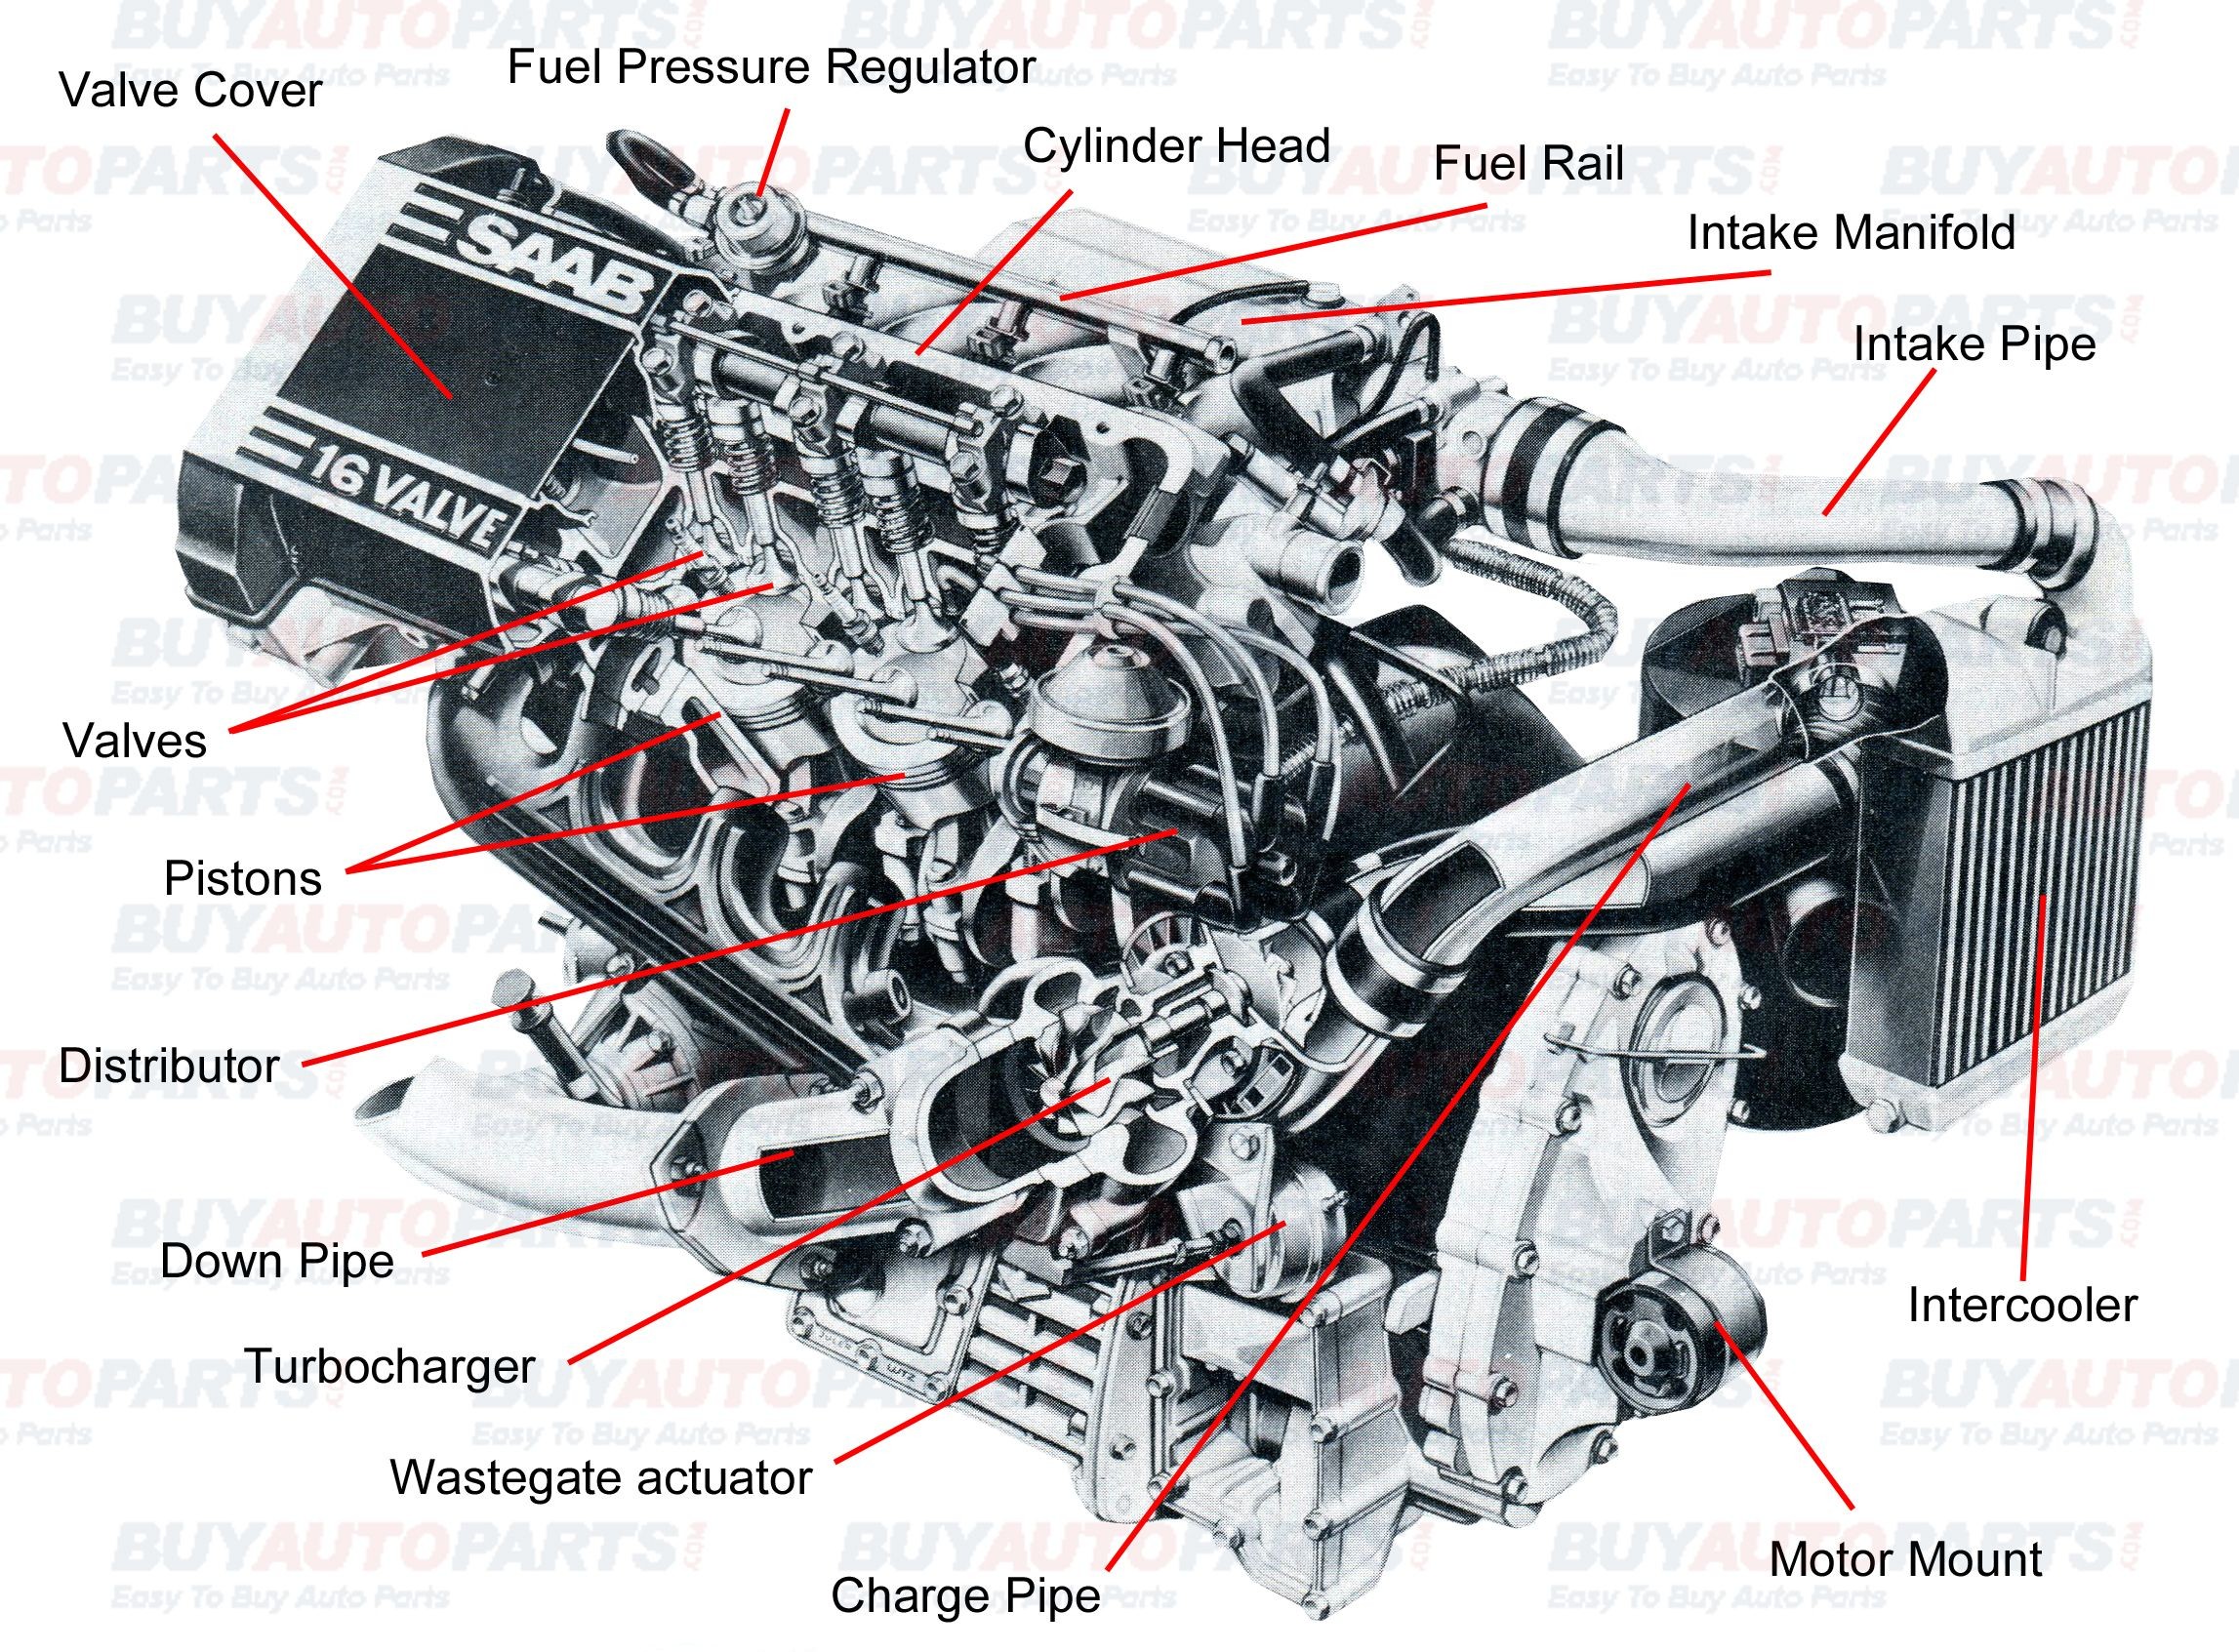 Parts Of An Engine Diagram All Internal Bustion Engines Have the Same Basic Ponents the Of Parts Of An Engine Diagram